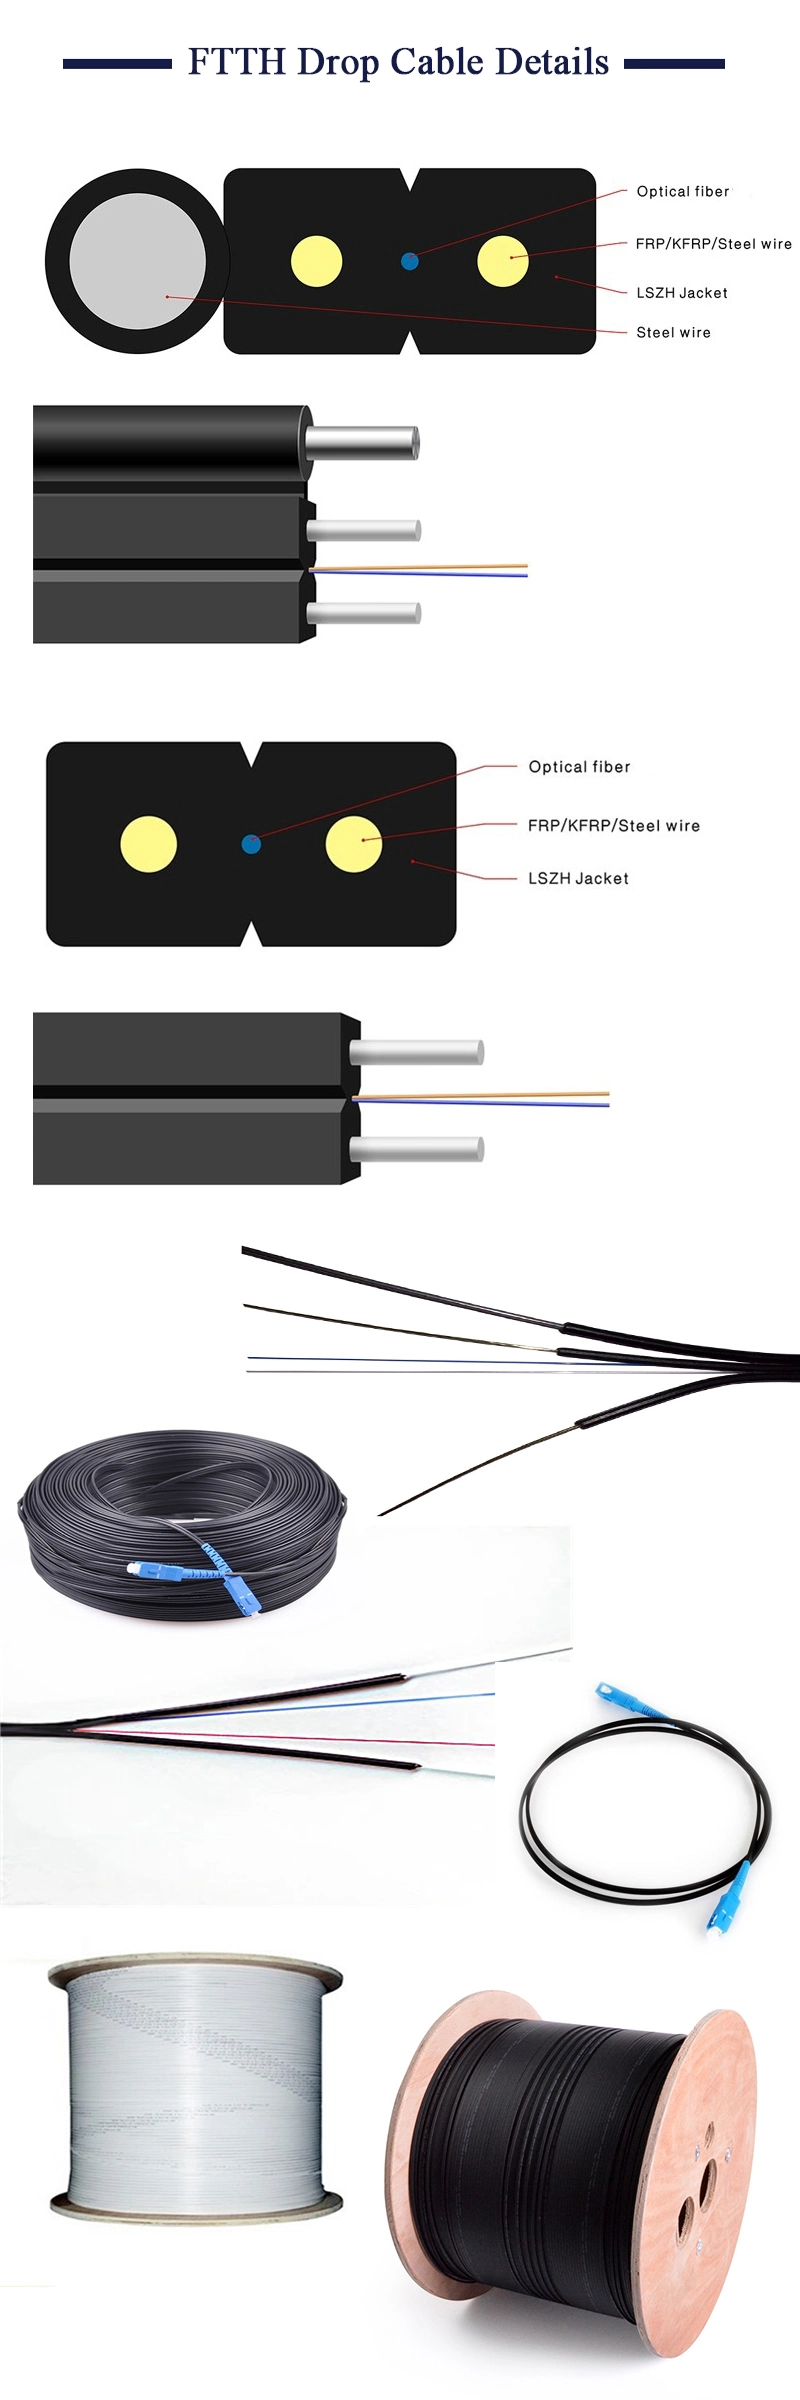 Outdoor / Indoor Sm 2 Core 4 Core FTTH Drop Cable Fiber Optic Cable